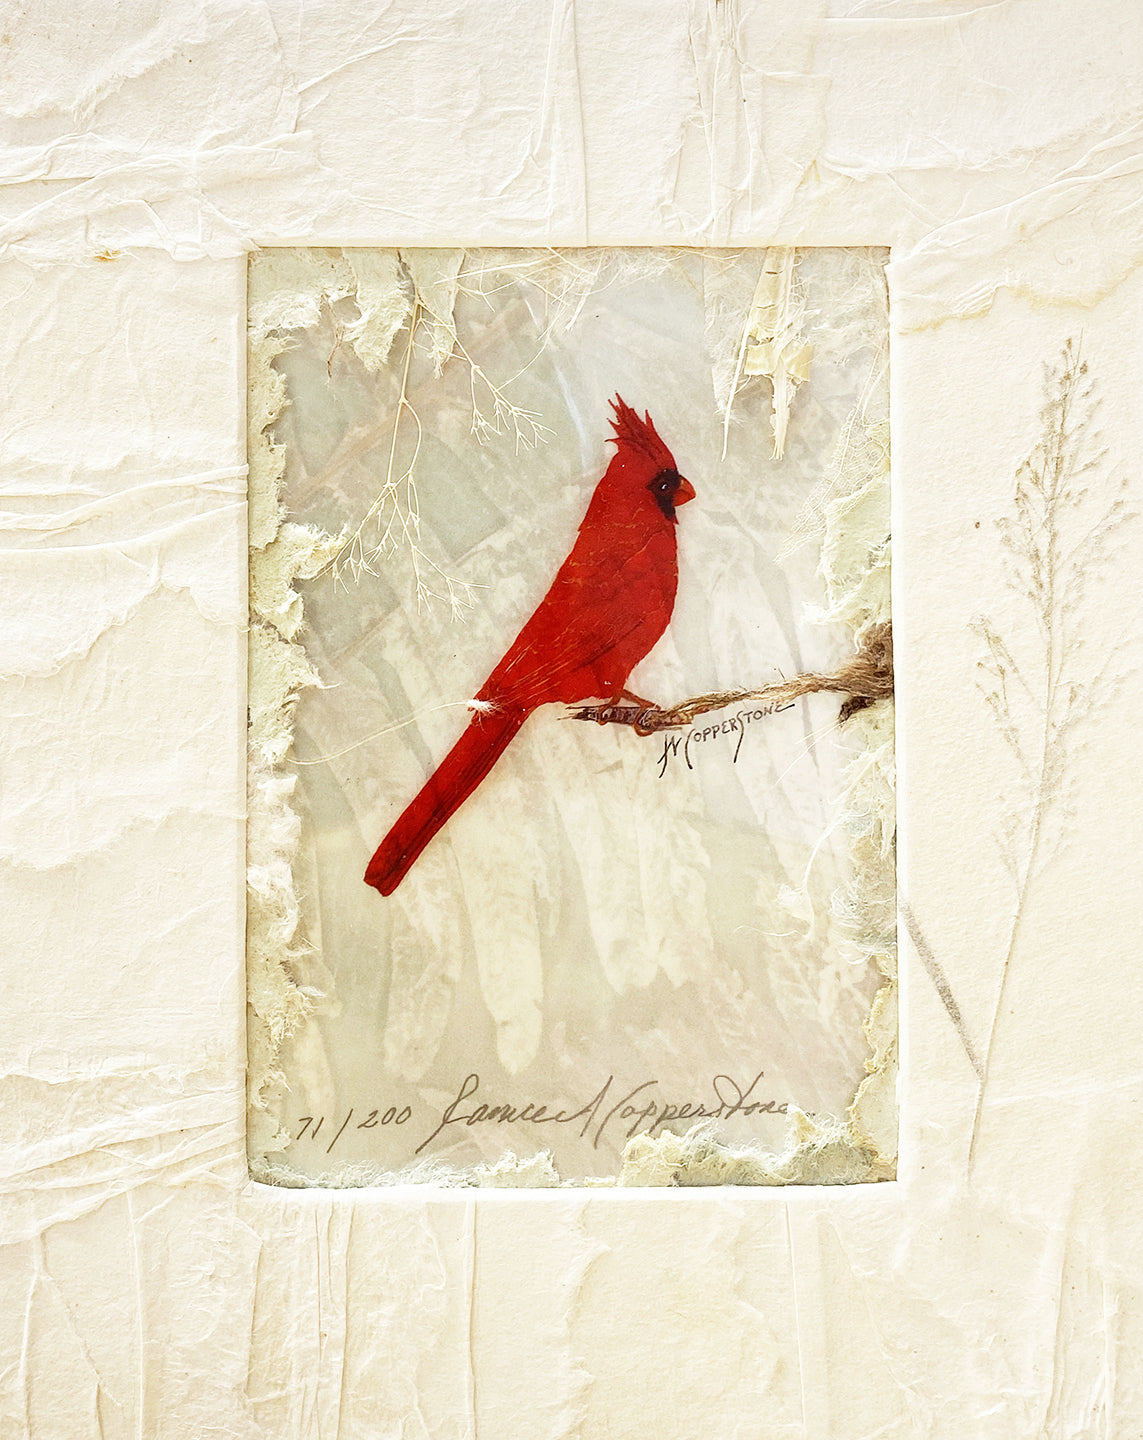 Blank greeting card by Janice A. Copperstone of Milford, Mich. 